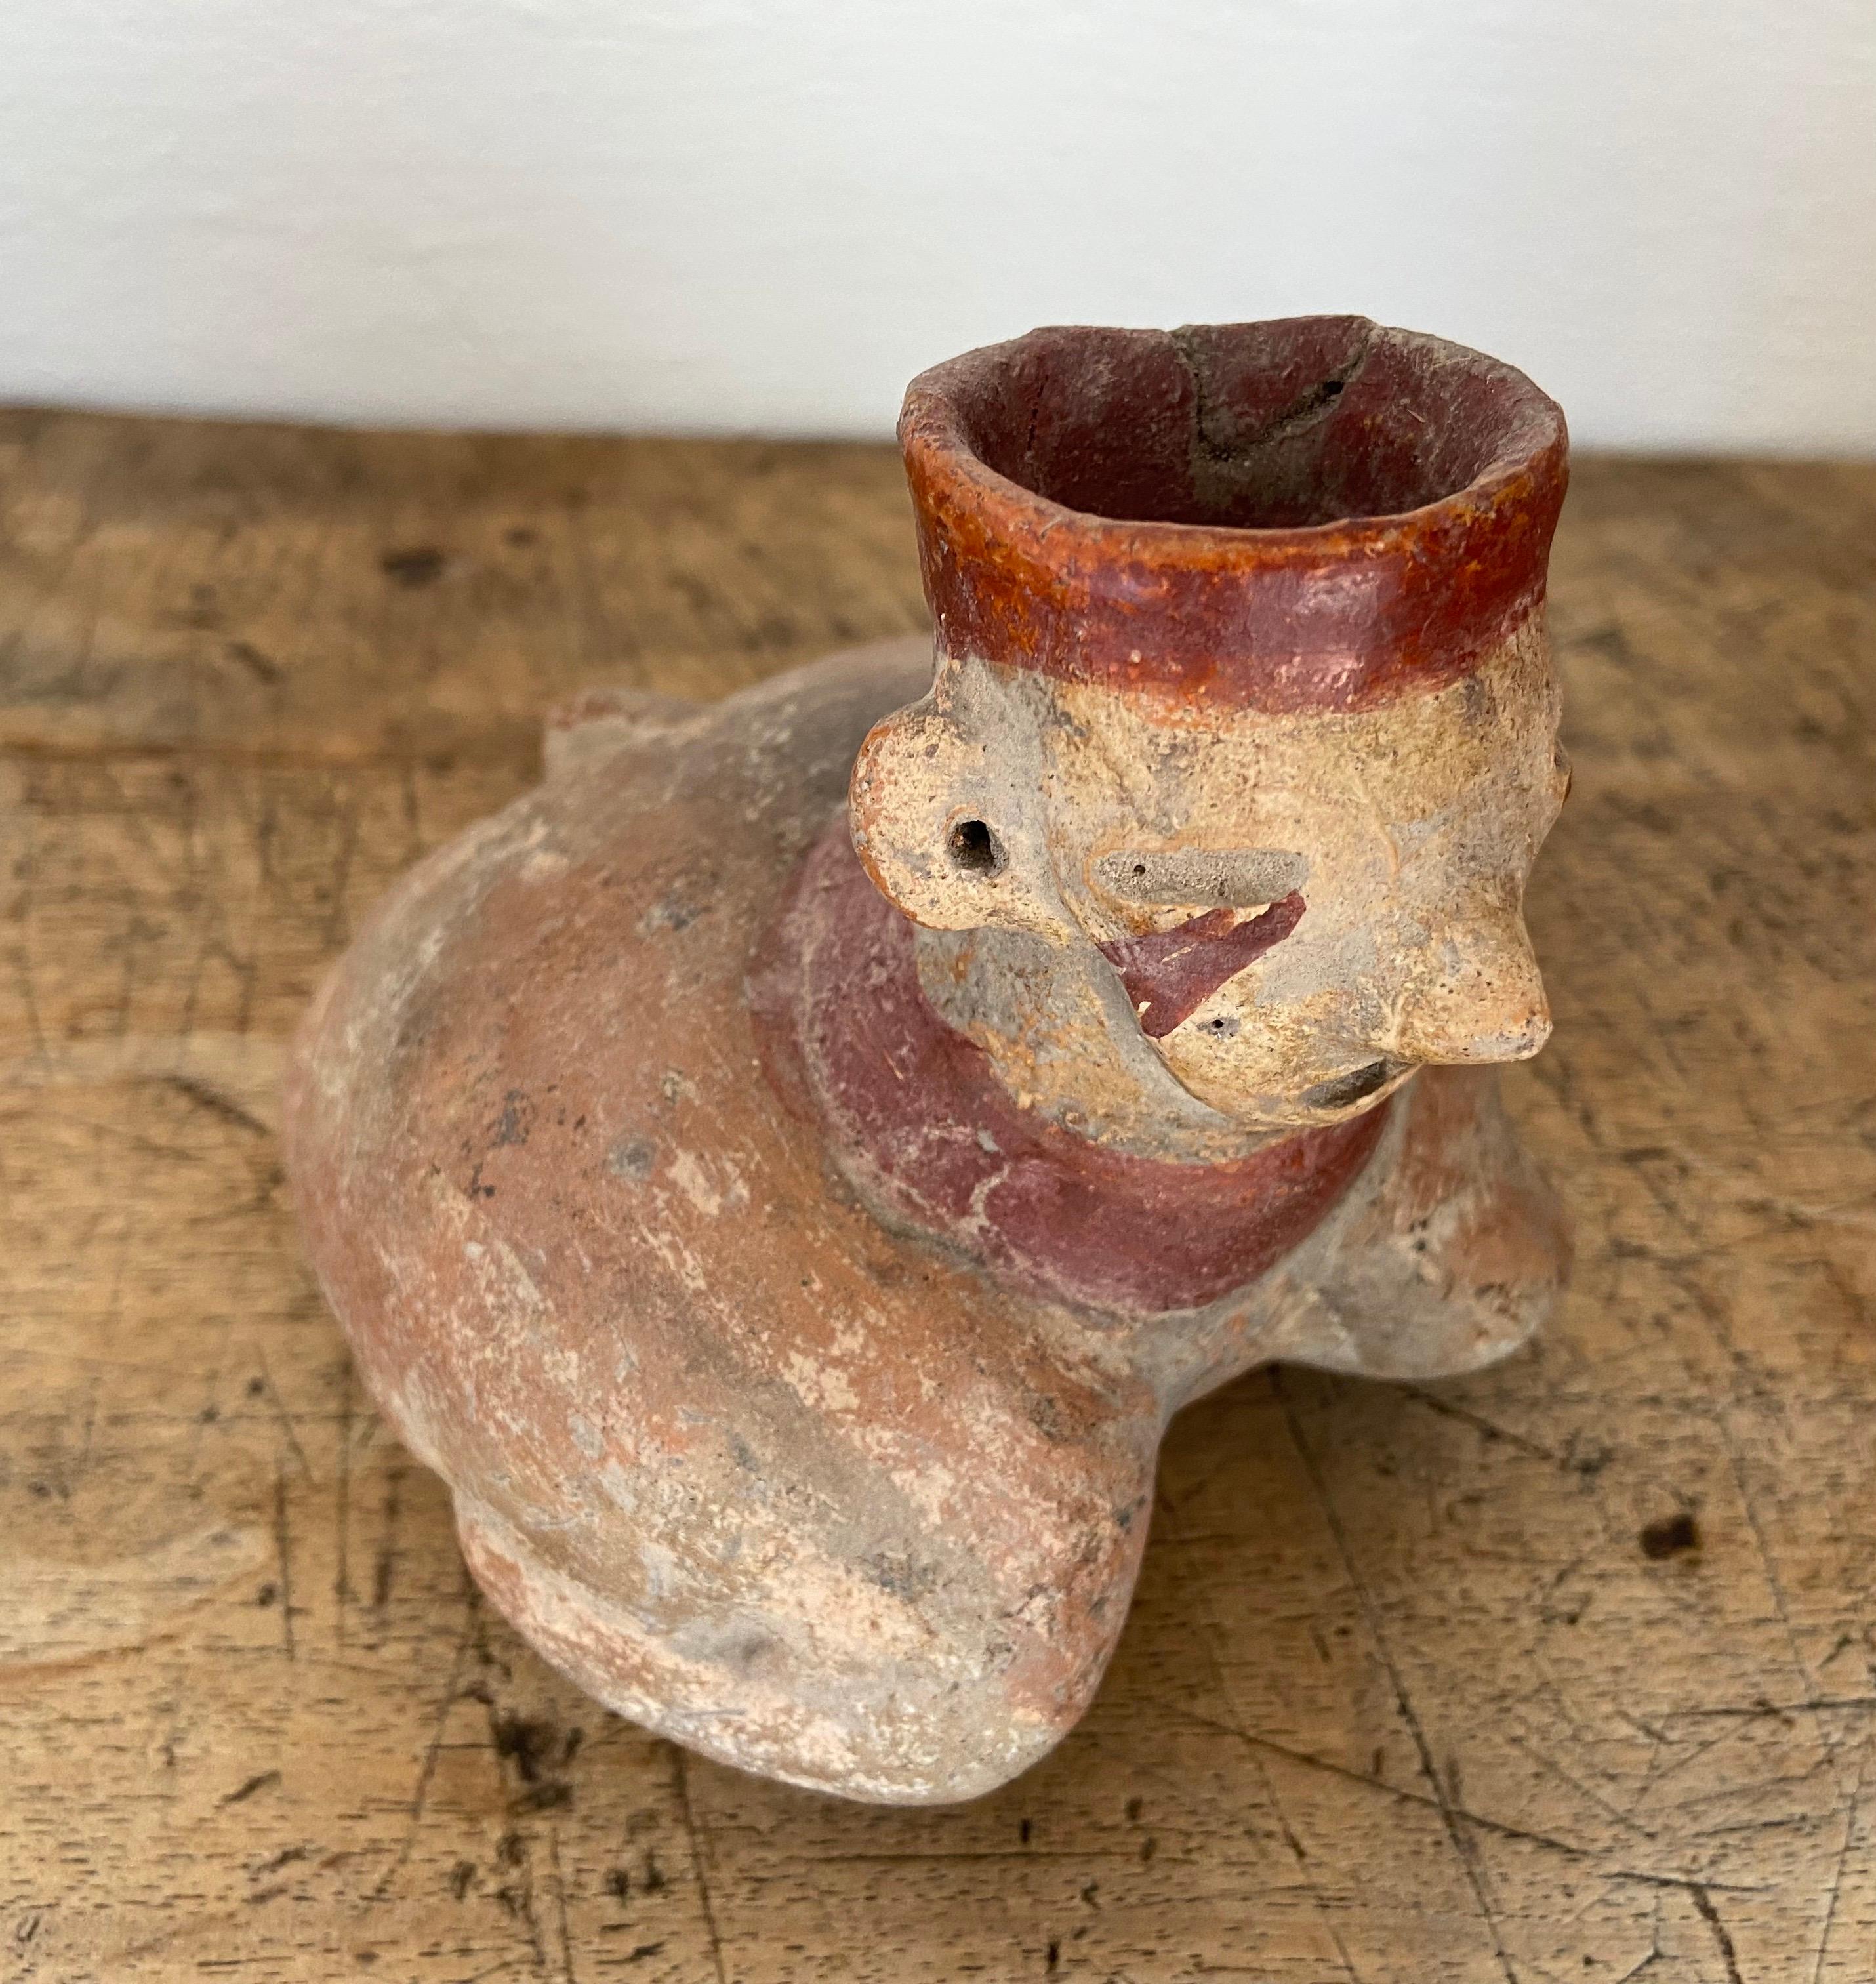 Prehispanic turtle vessel with human head and red paint, from the outskirts of Ixtlan del Rio, Nayarit, Mexico, date unknown. Appears to be a candleholder or copal burner. Rim on the head has been chipped at one point and glued.